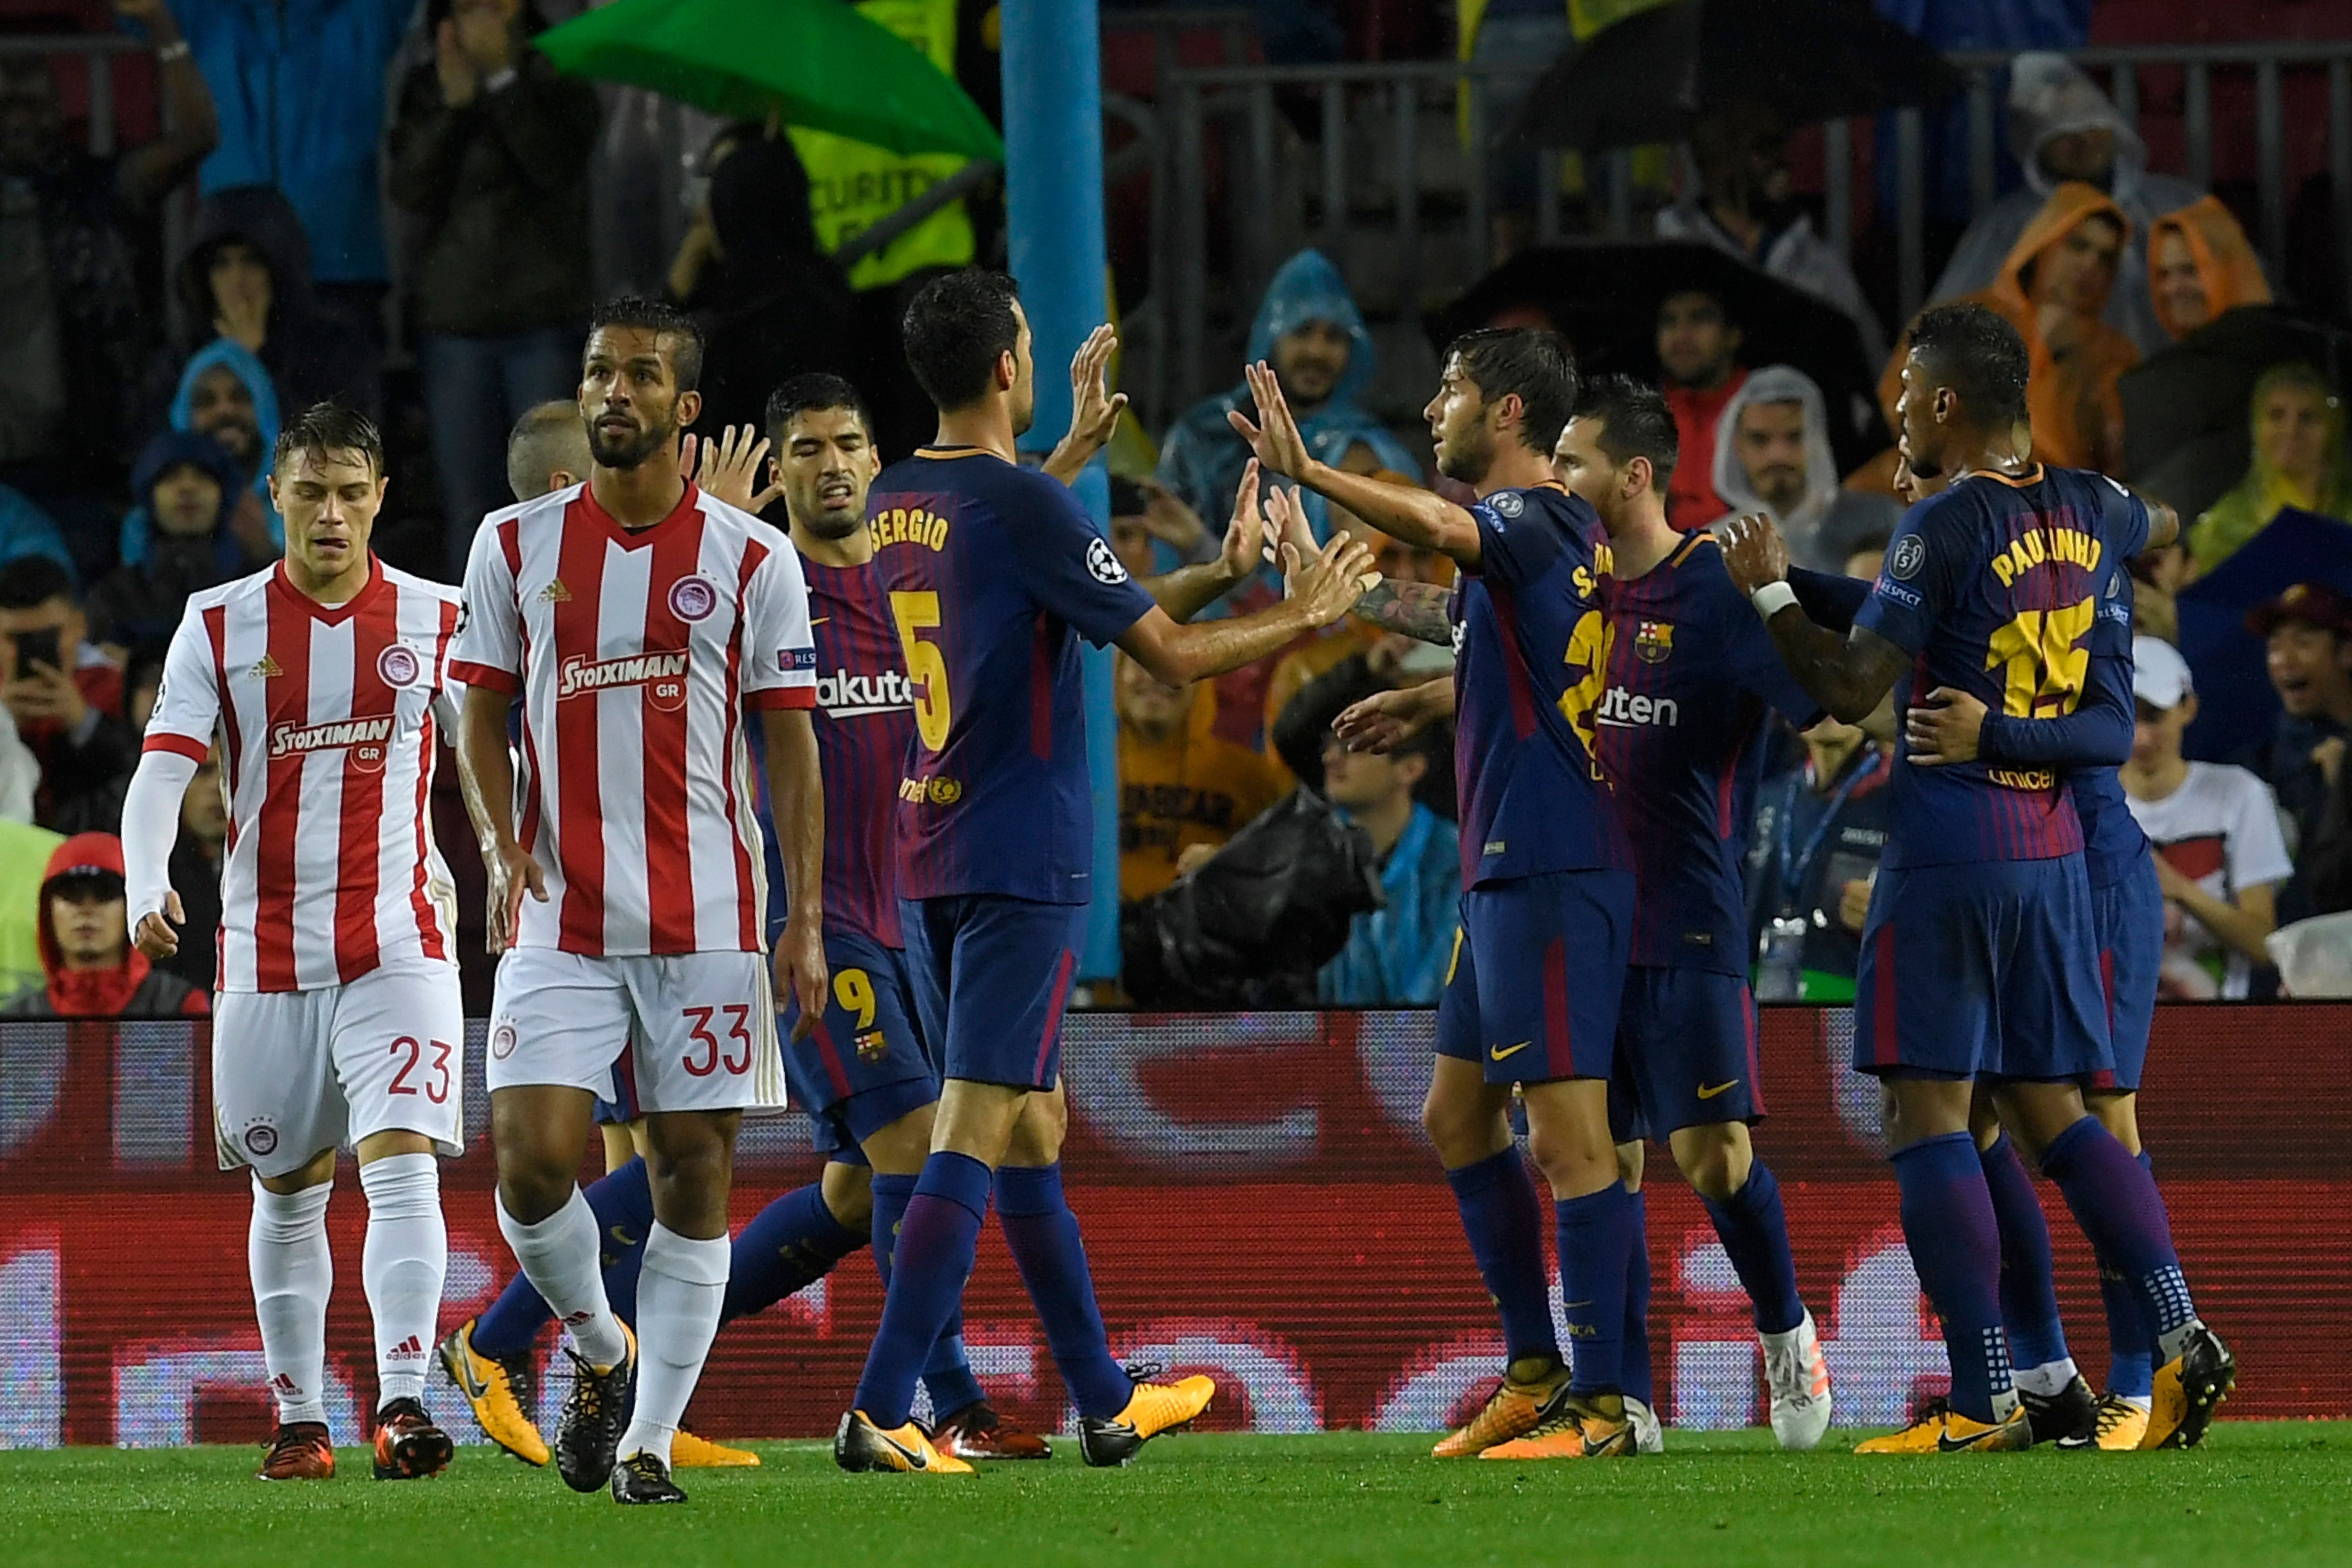 Barcelona players celebrate a goal during the UEFA Champions League group D football match FC Barcelona vs Olympiacos FC at the Camp Nou stadium in Barcelona on Ocotber 18, 2017. / AFP PHOTO / LLUIS GENE        (Photo credit should read LLUIS GENE/AFP/Getty Images)